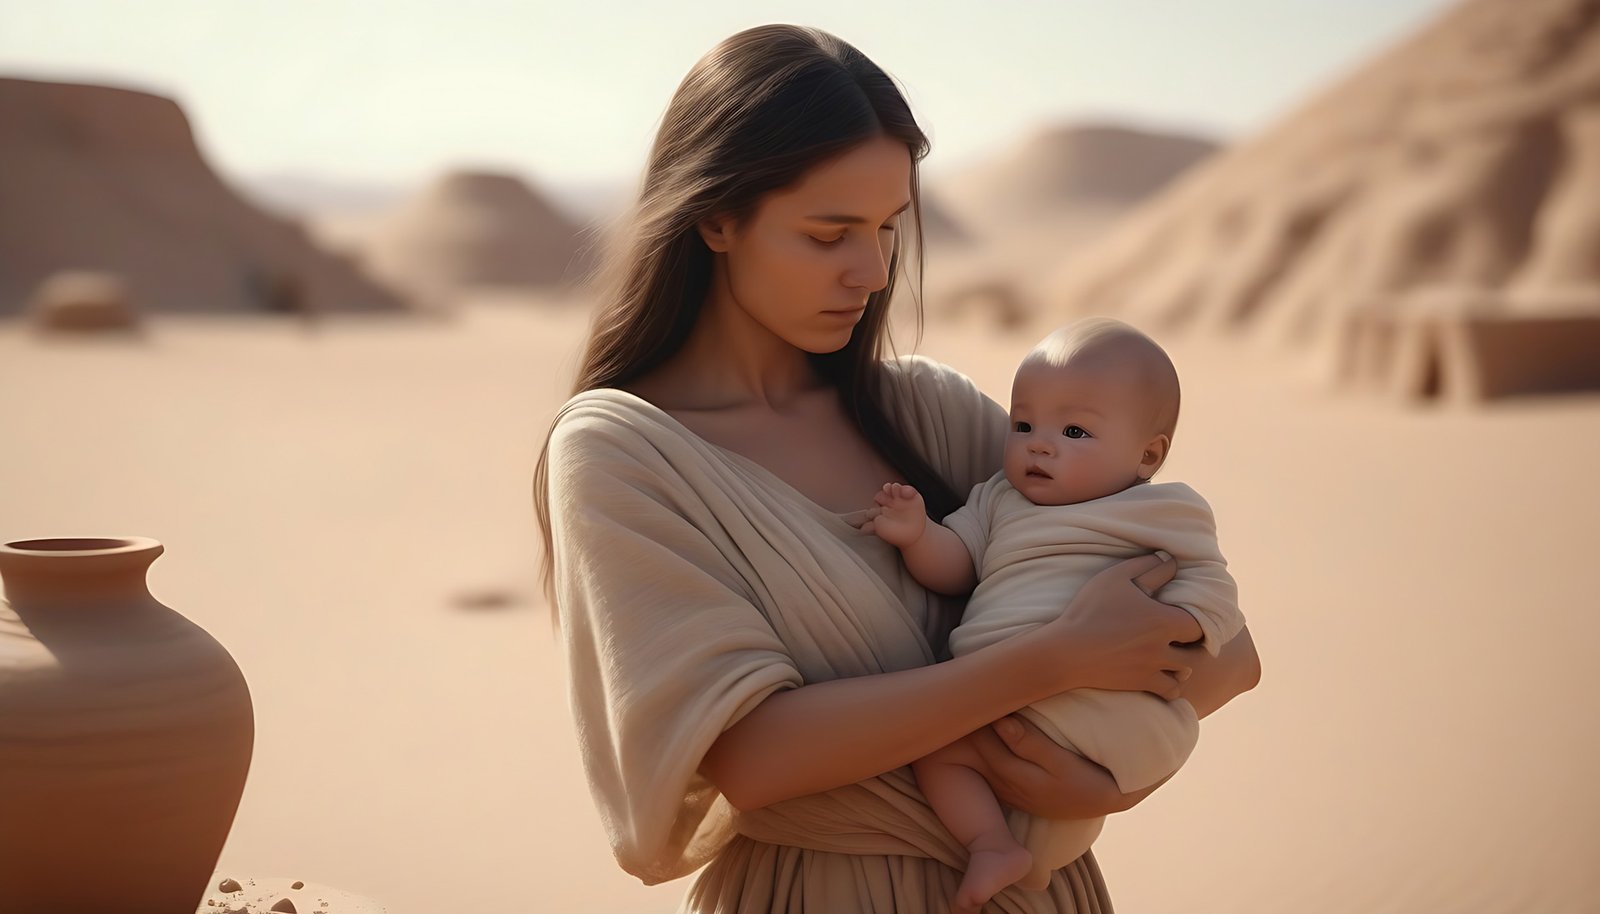 create ancient woman 1000 bce with a baby on hands desert background and next to a clay jar lying